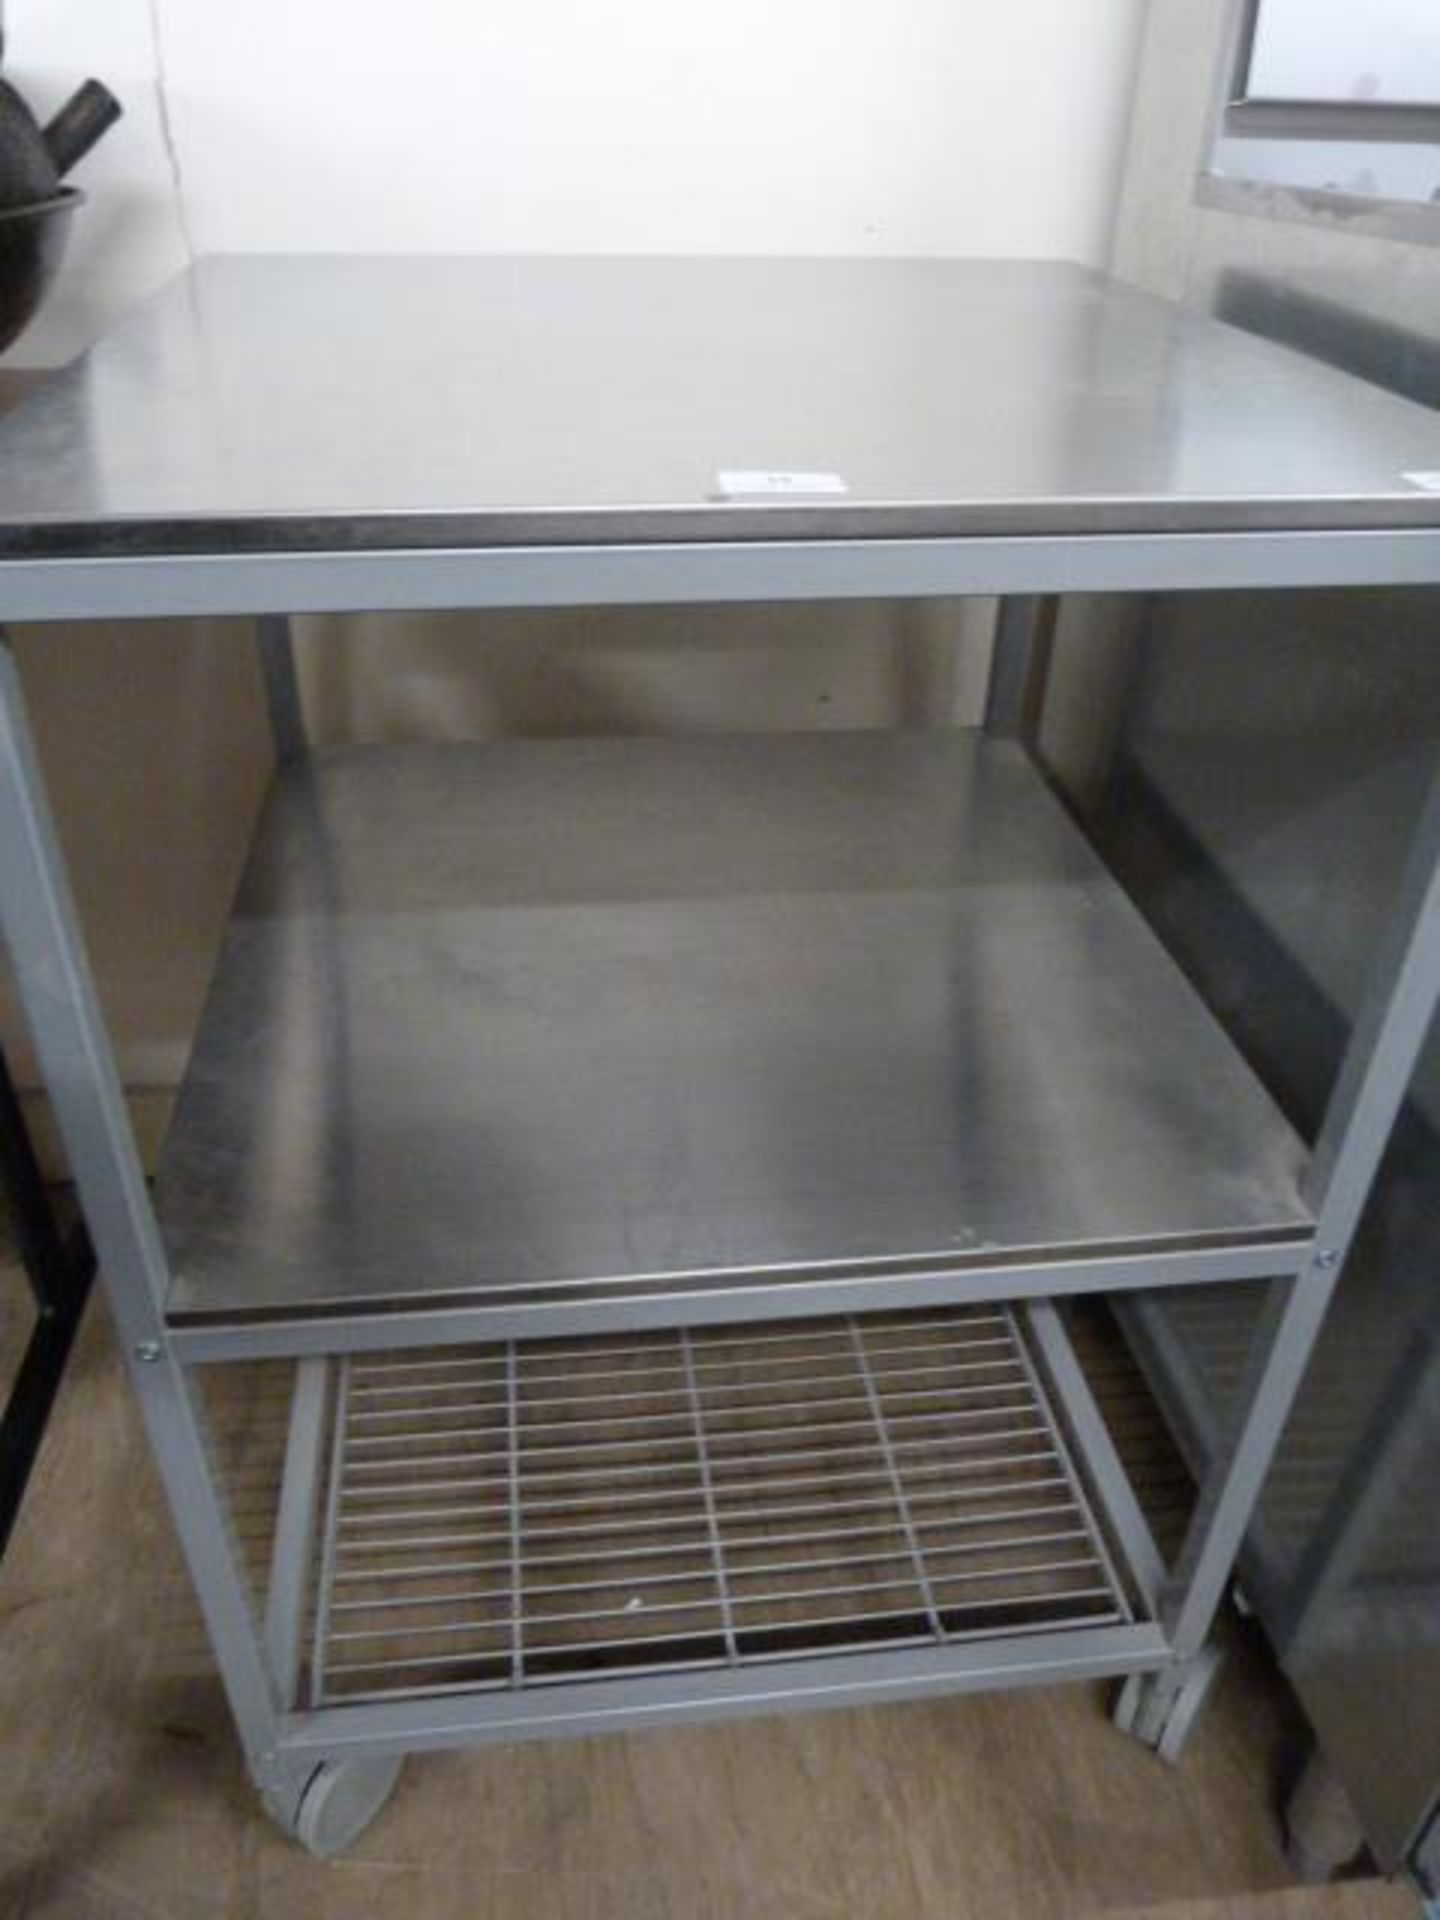 Small Stainless Steel Preparation Table with Shelv